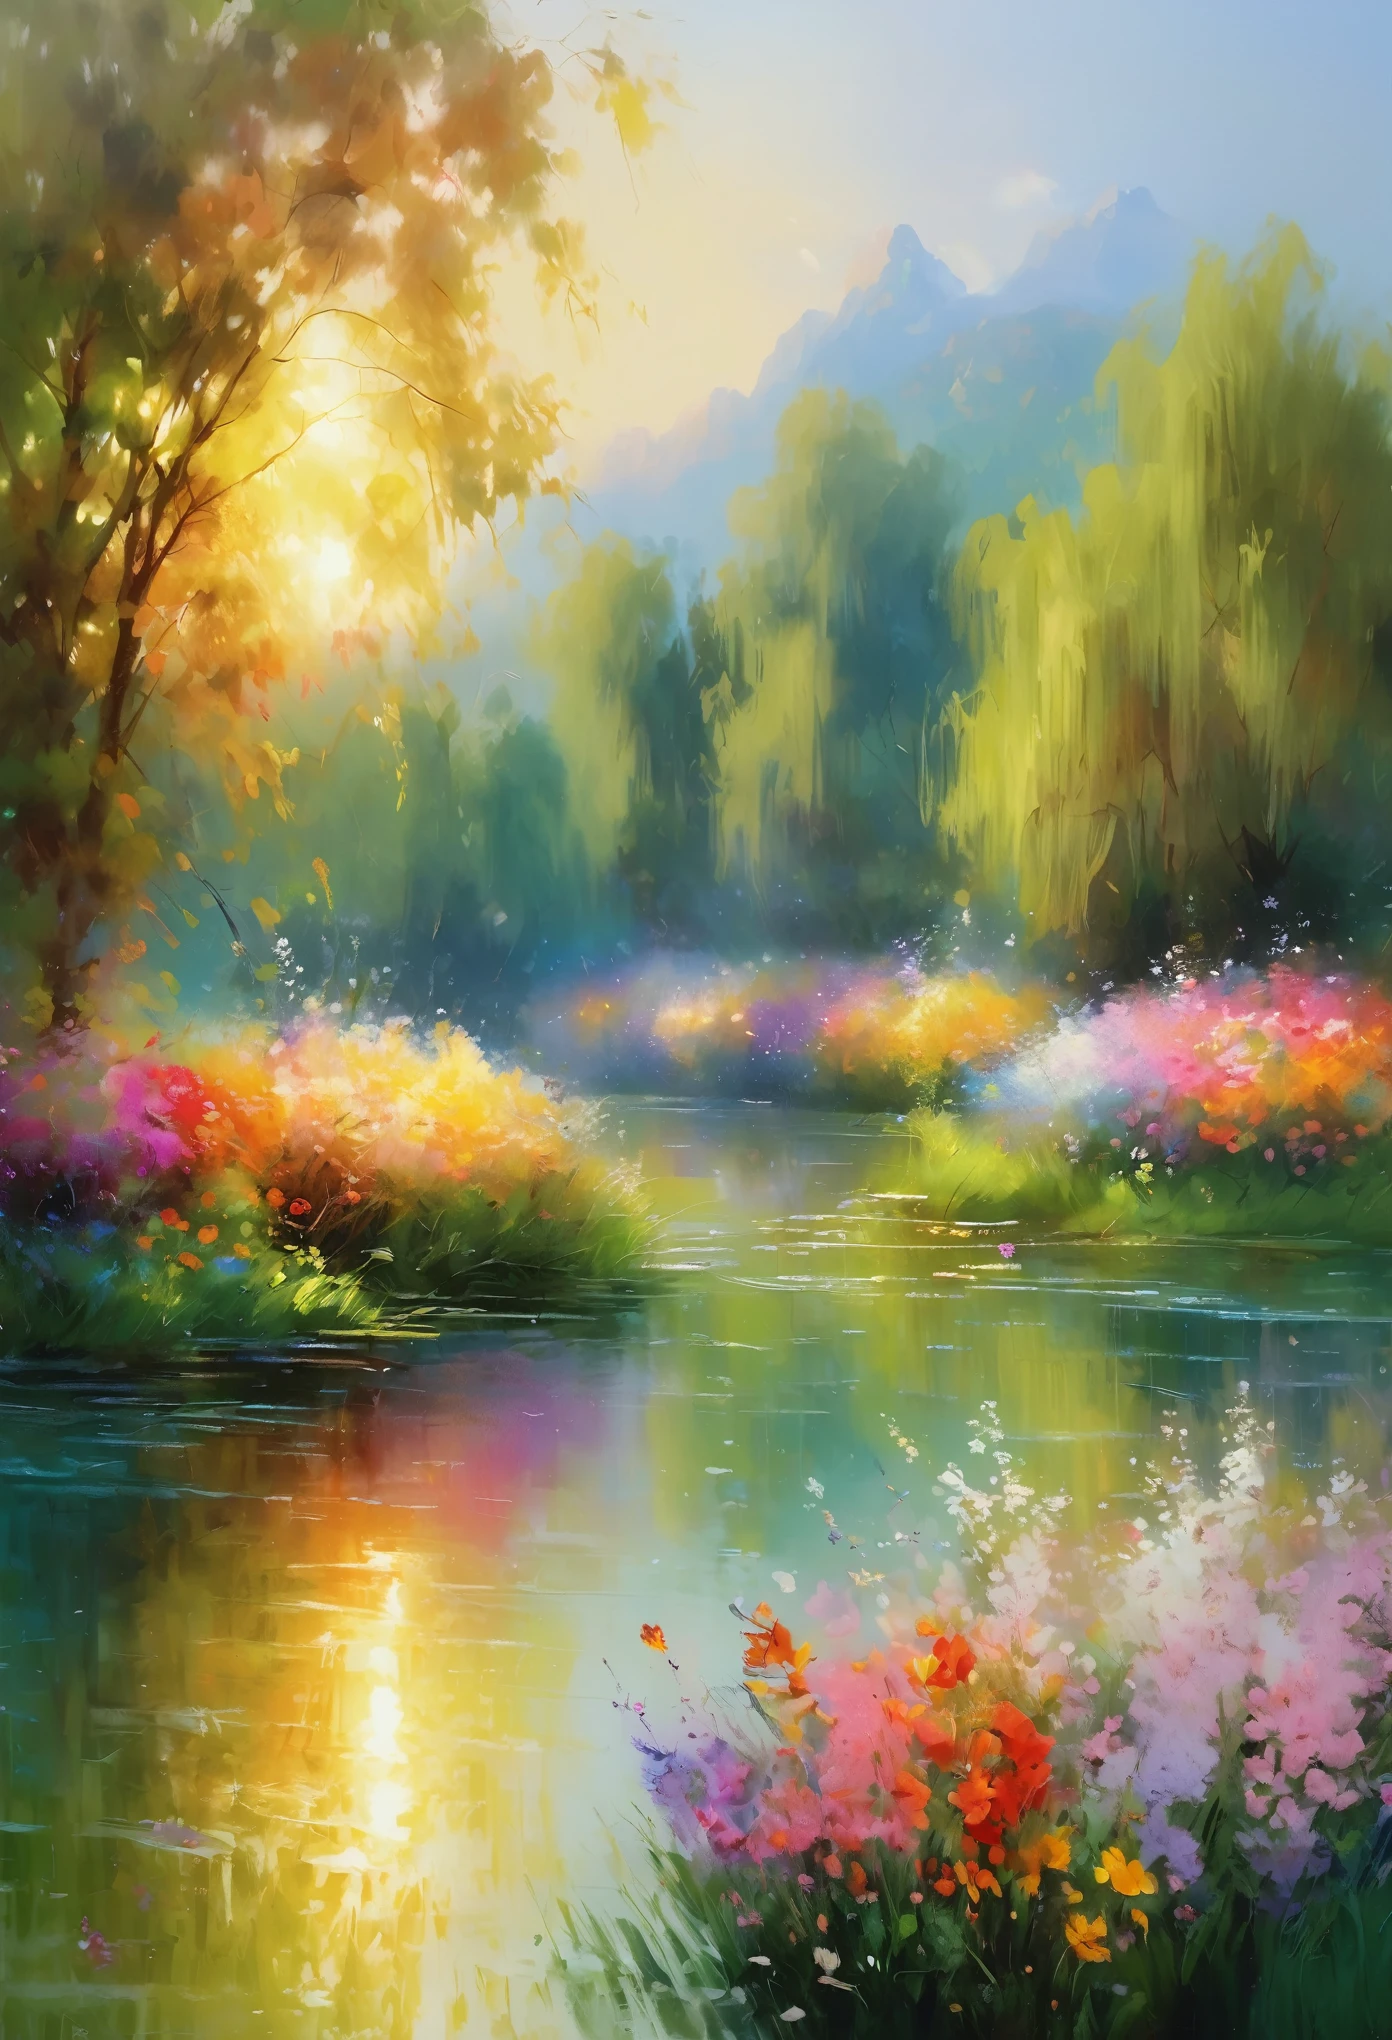 (highest quality、4K、8k、High resolution、masterpiece:1.2)、Super detailed、Real、Inspired by Monet、Impressionist masterpiece、oil、Beautiful detailed brushwork、Colorful flowers、Breathtaking landscapes、Peaceful garden scene、wood々Sunlight shining through、Reflection of rippling water、Subtle pastel colors、Vibrant wildflowers、Dreamy atmosphere、Soft and elegant atmosphere、Lush greenery、Subtle color gradients、Impressionist Texture、A subtle play of light and shadow、Impression of movement and spontaneity、Peaceful and serene、An impression of tranquility and harmony、The beauty of painting、Impressionist Techniques、Ethereal and seductive、Impressionist interpretation of nature、A harmonious composition、Impressionist brushstrokes、Genuine impressionist style、Emotional and vibrant、Wonderfully poetic、Sublime and atmospheric、Romantic and idyllic、A masterpiece that captures the essence of impressionism。